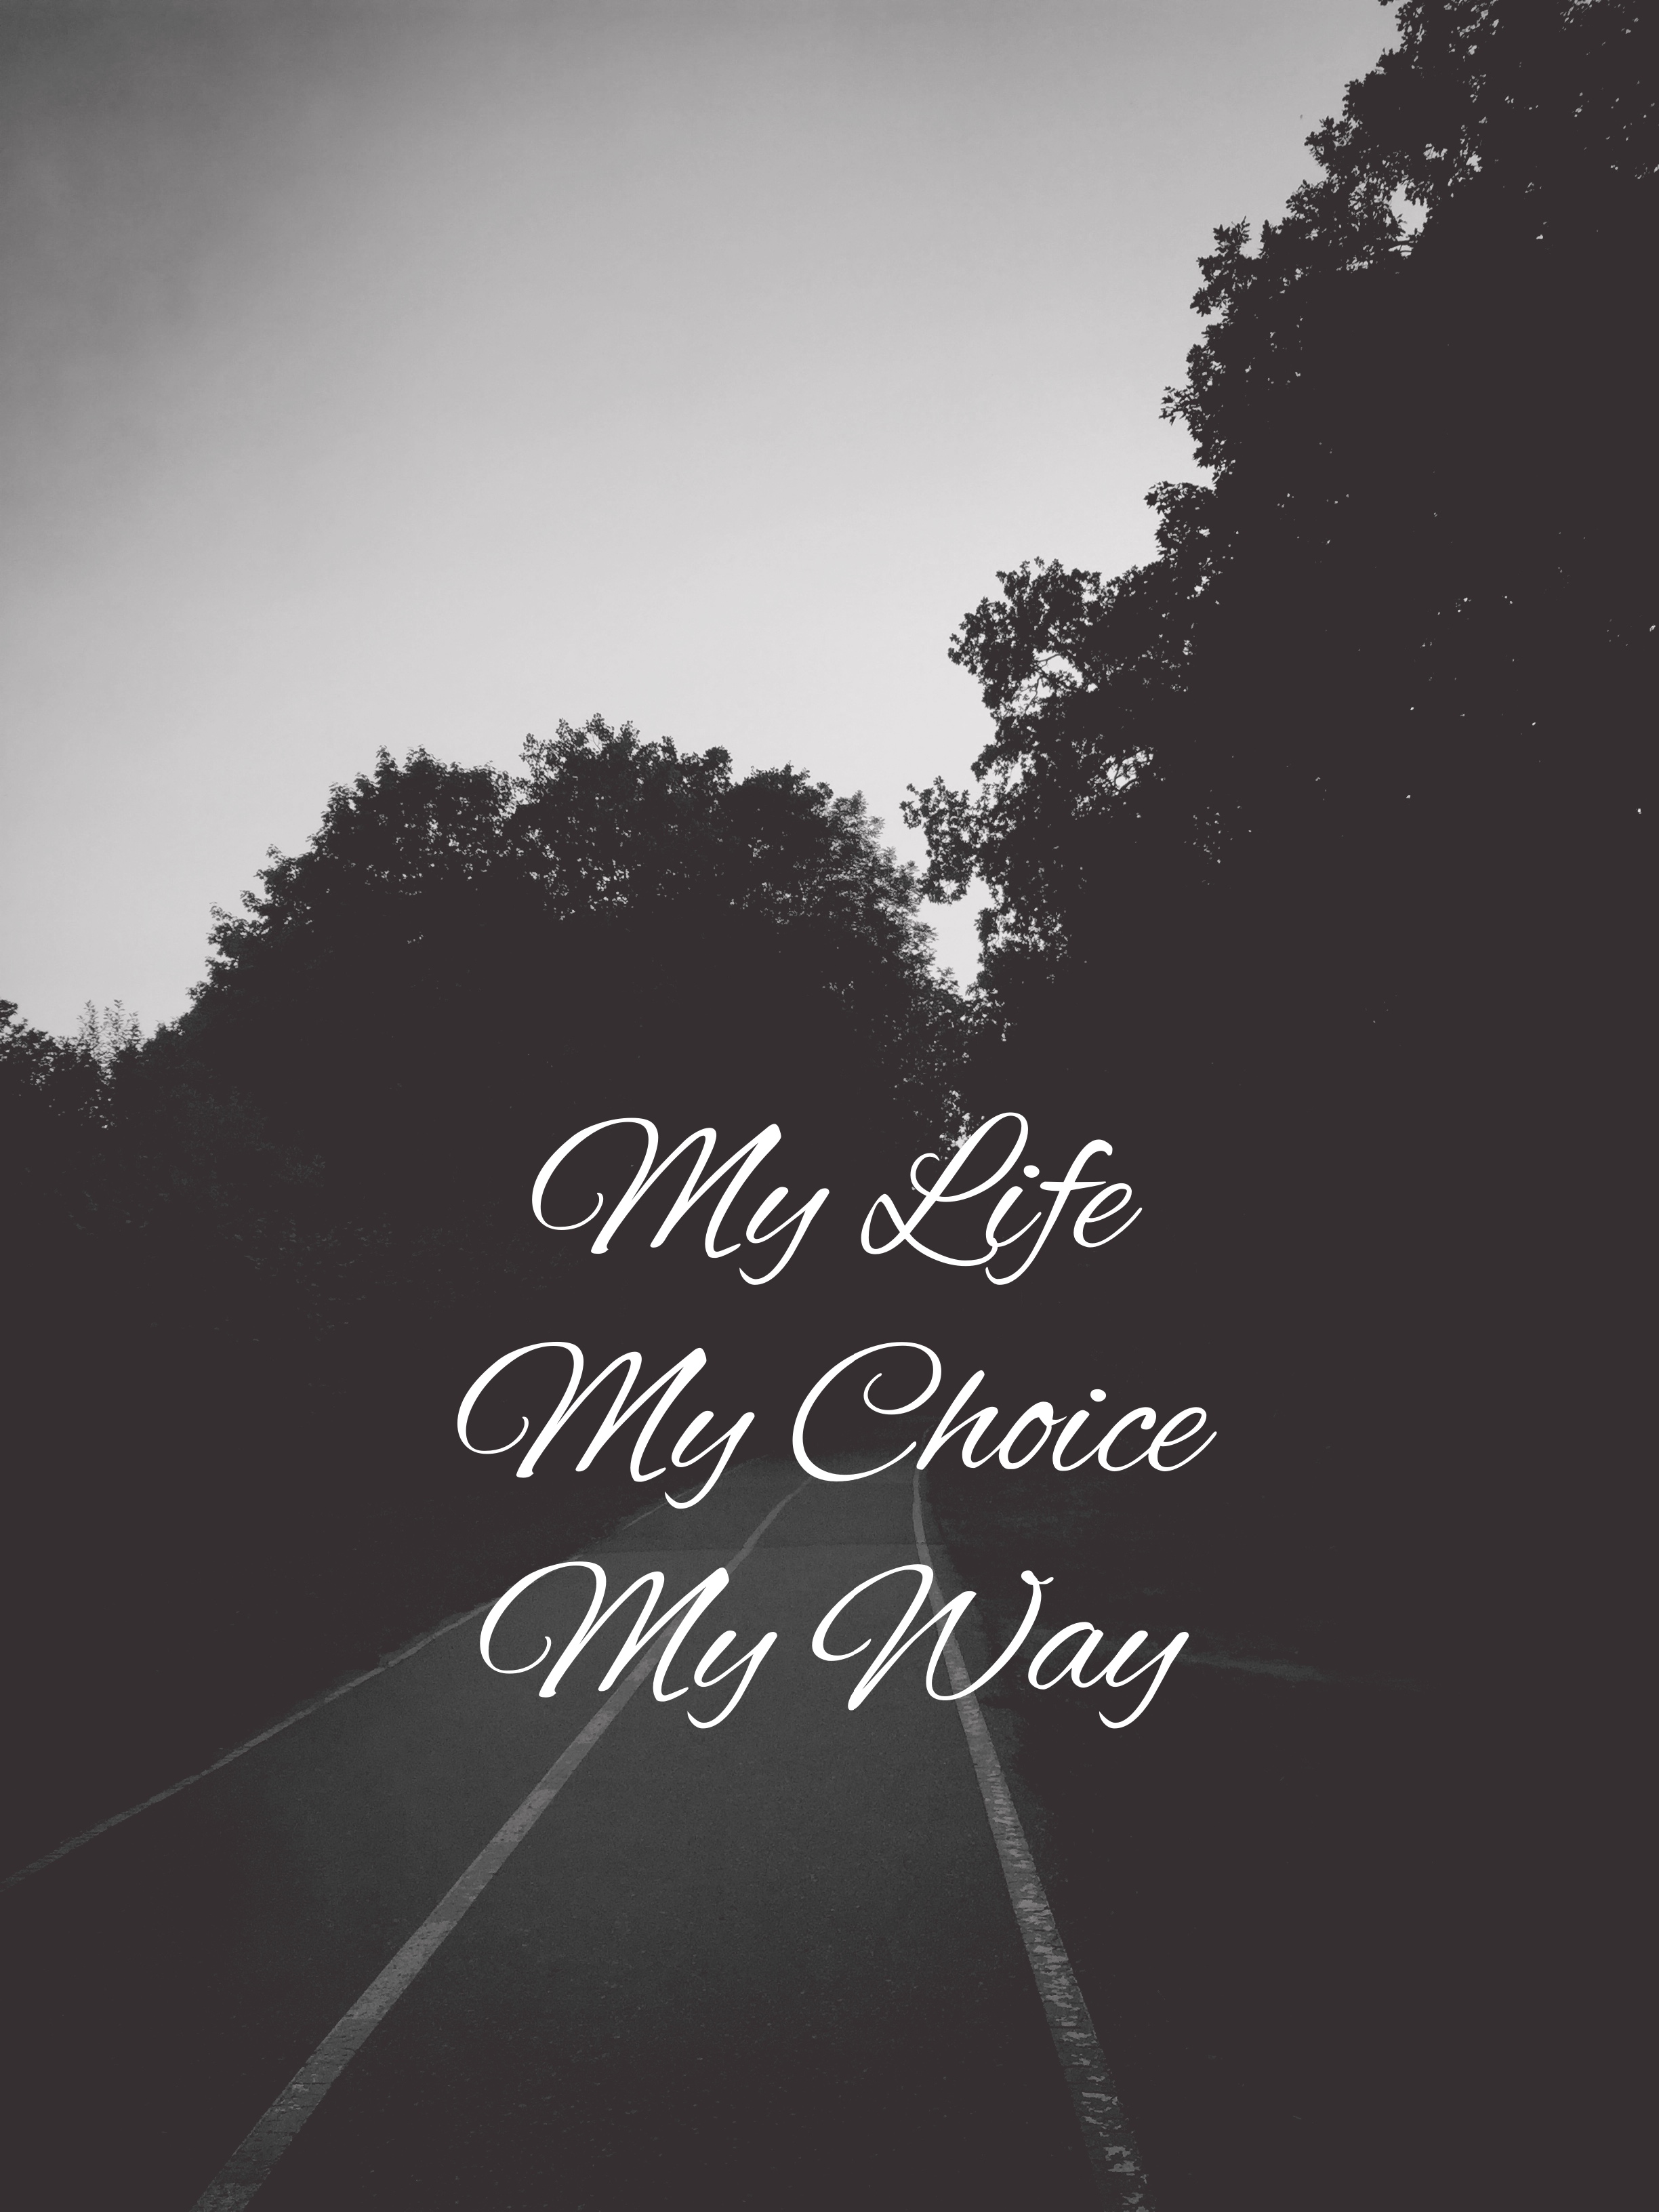 bw, words, text, quotation, quote, chb, inscription, road, path, way